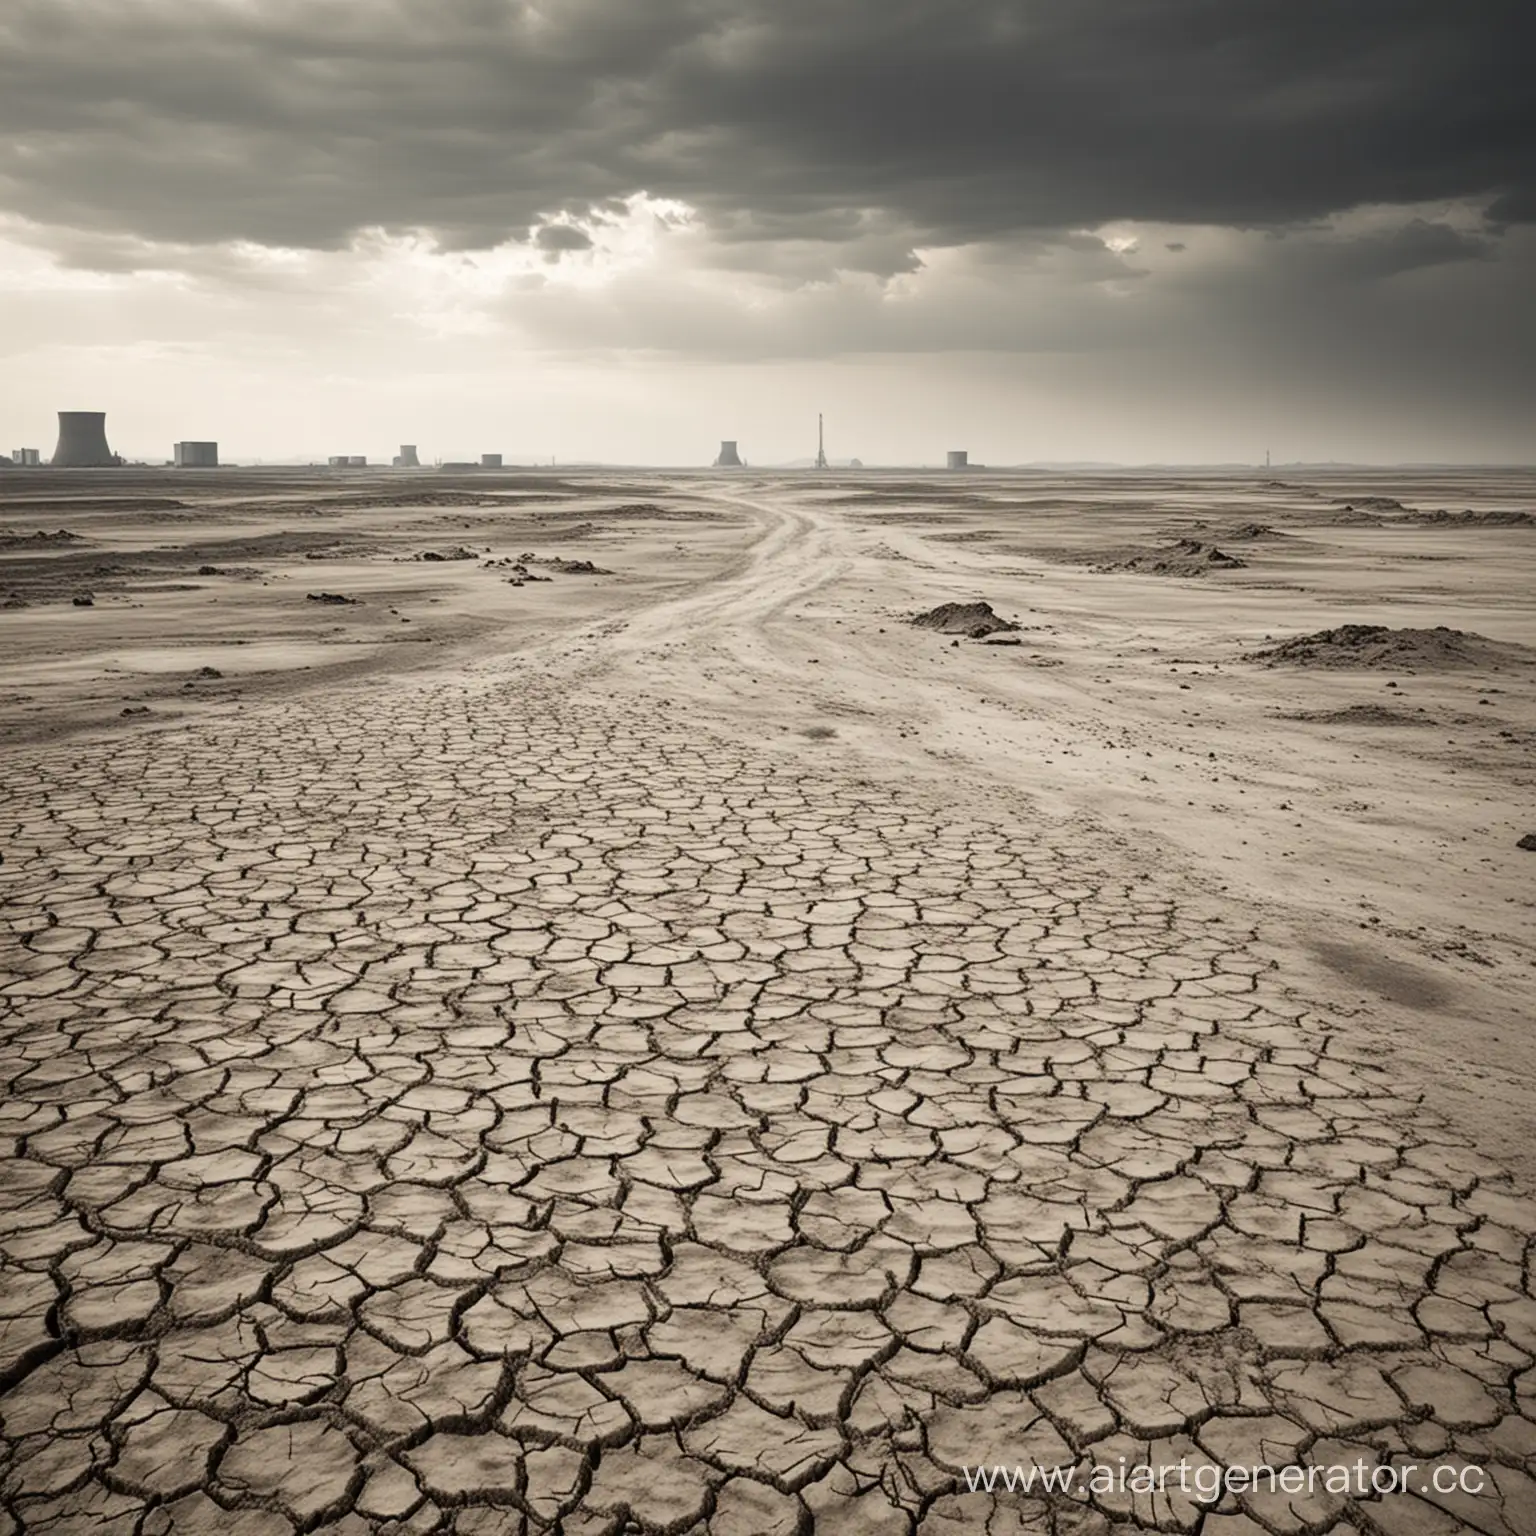 Desolate-Nuclear-Wasteland-Landscape-with-Grey-Atmosphere